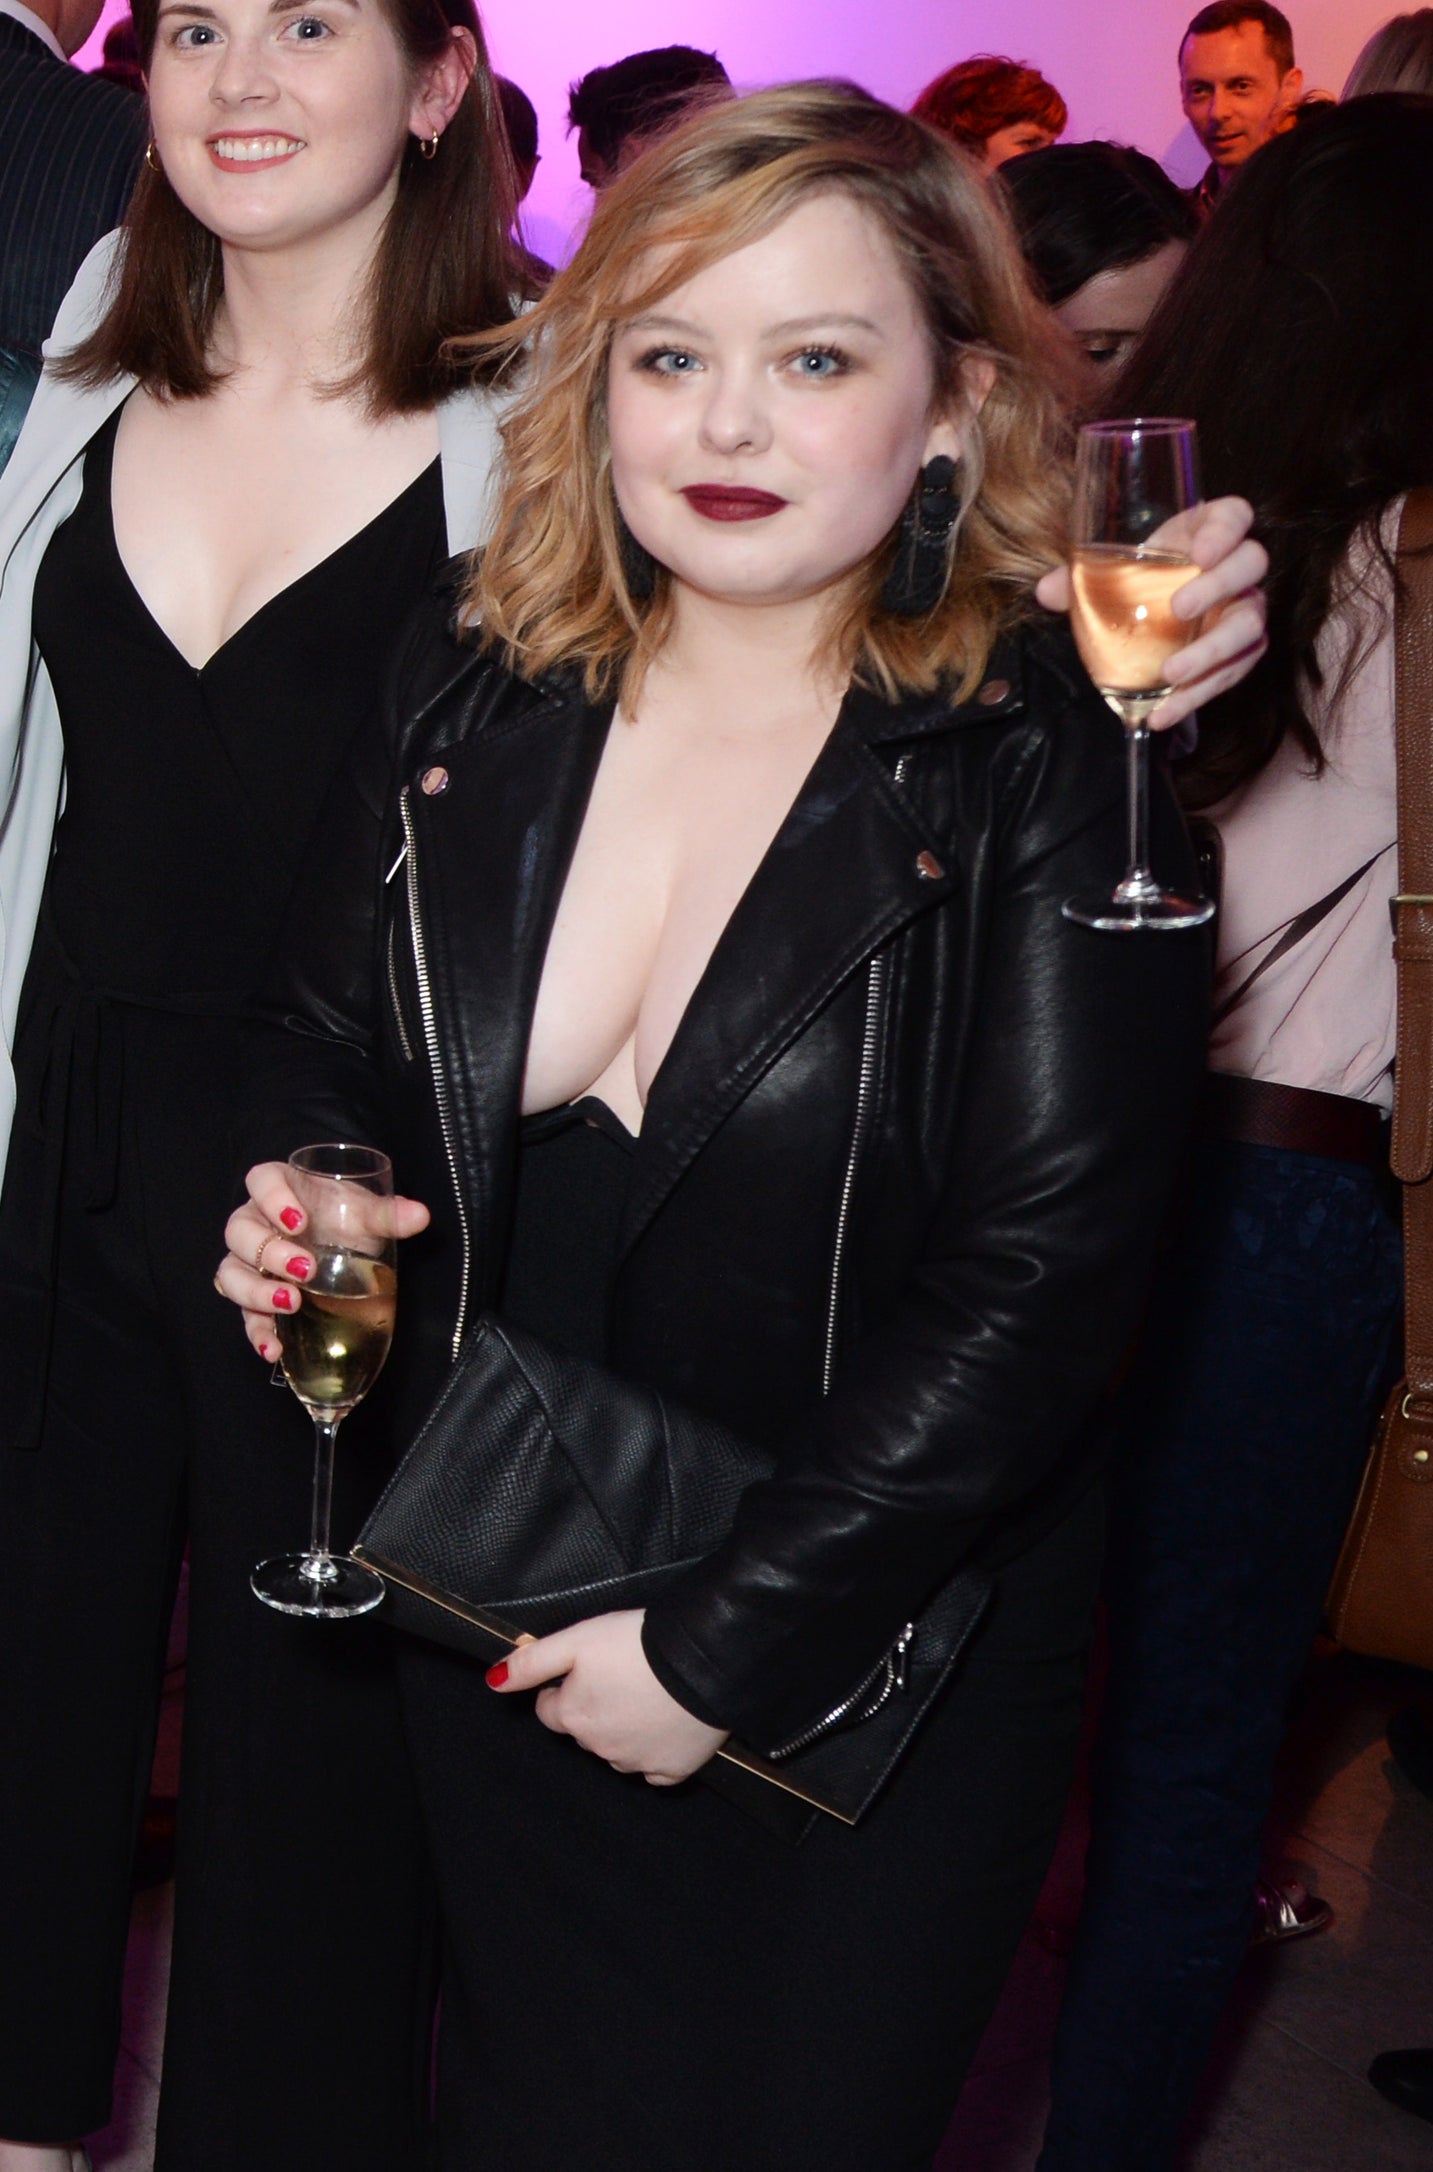 Nicola in a leather jacket holding a drink